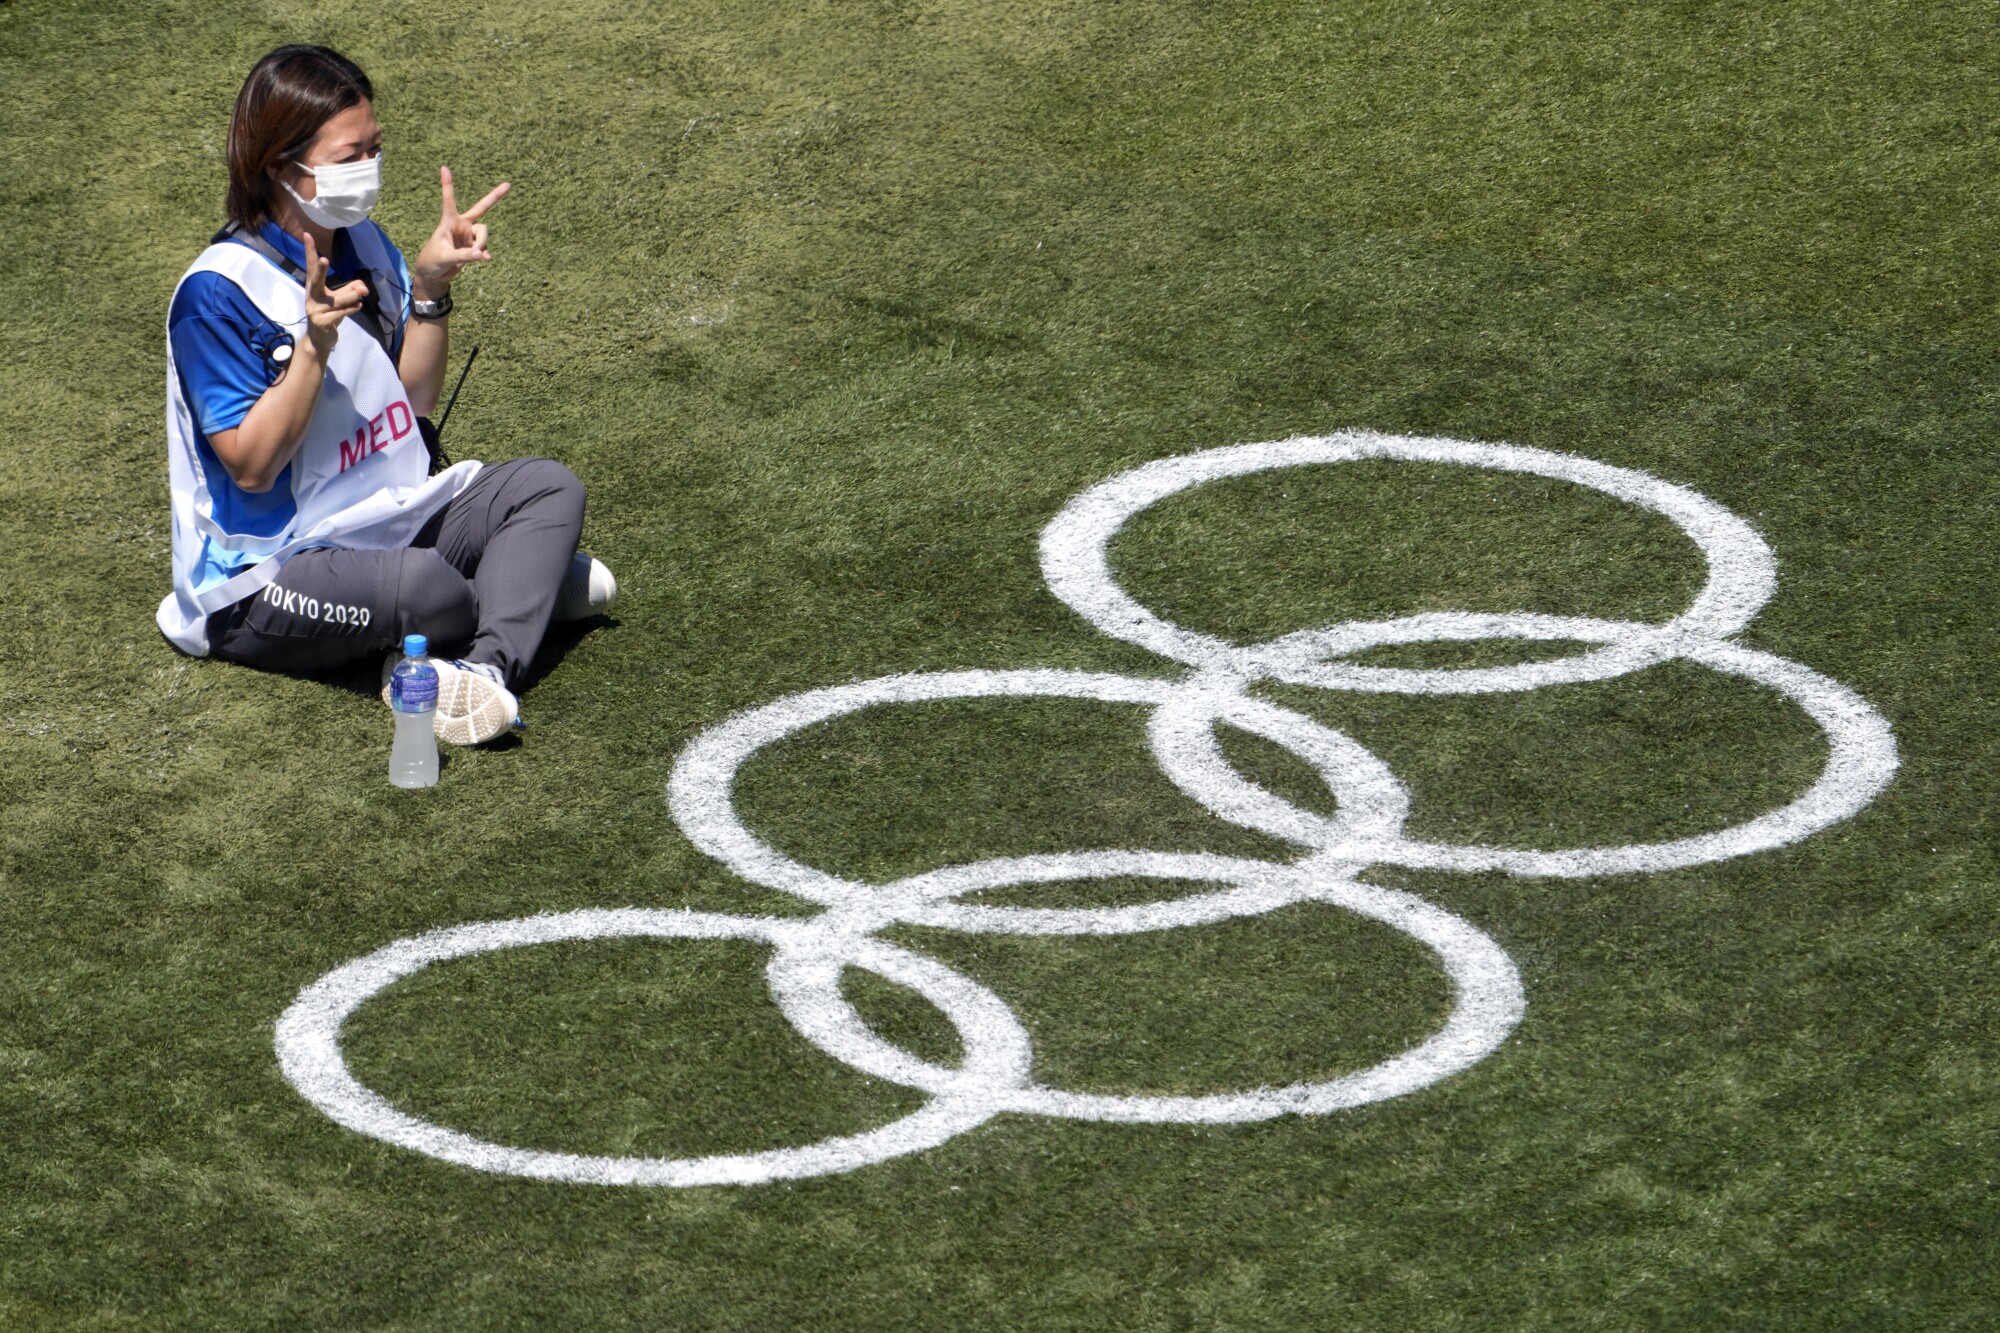 A worker poses with Olympic rings on grass 